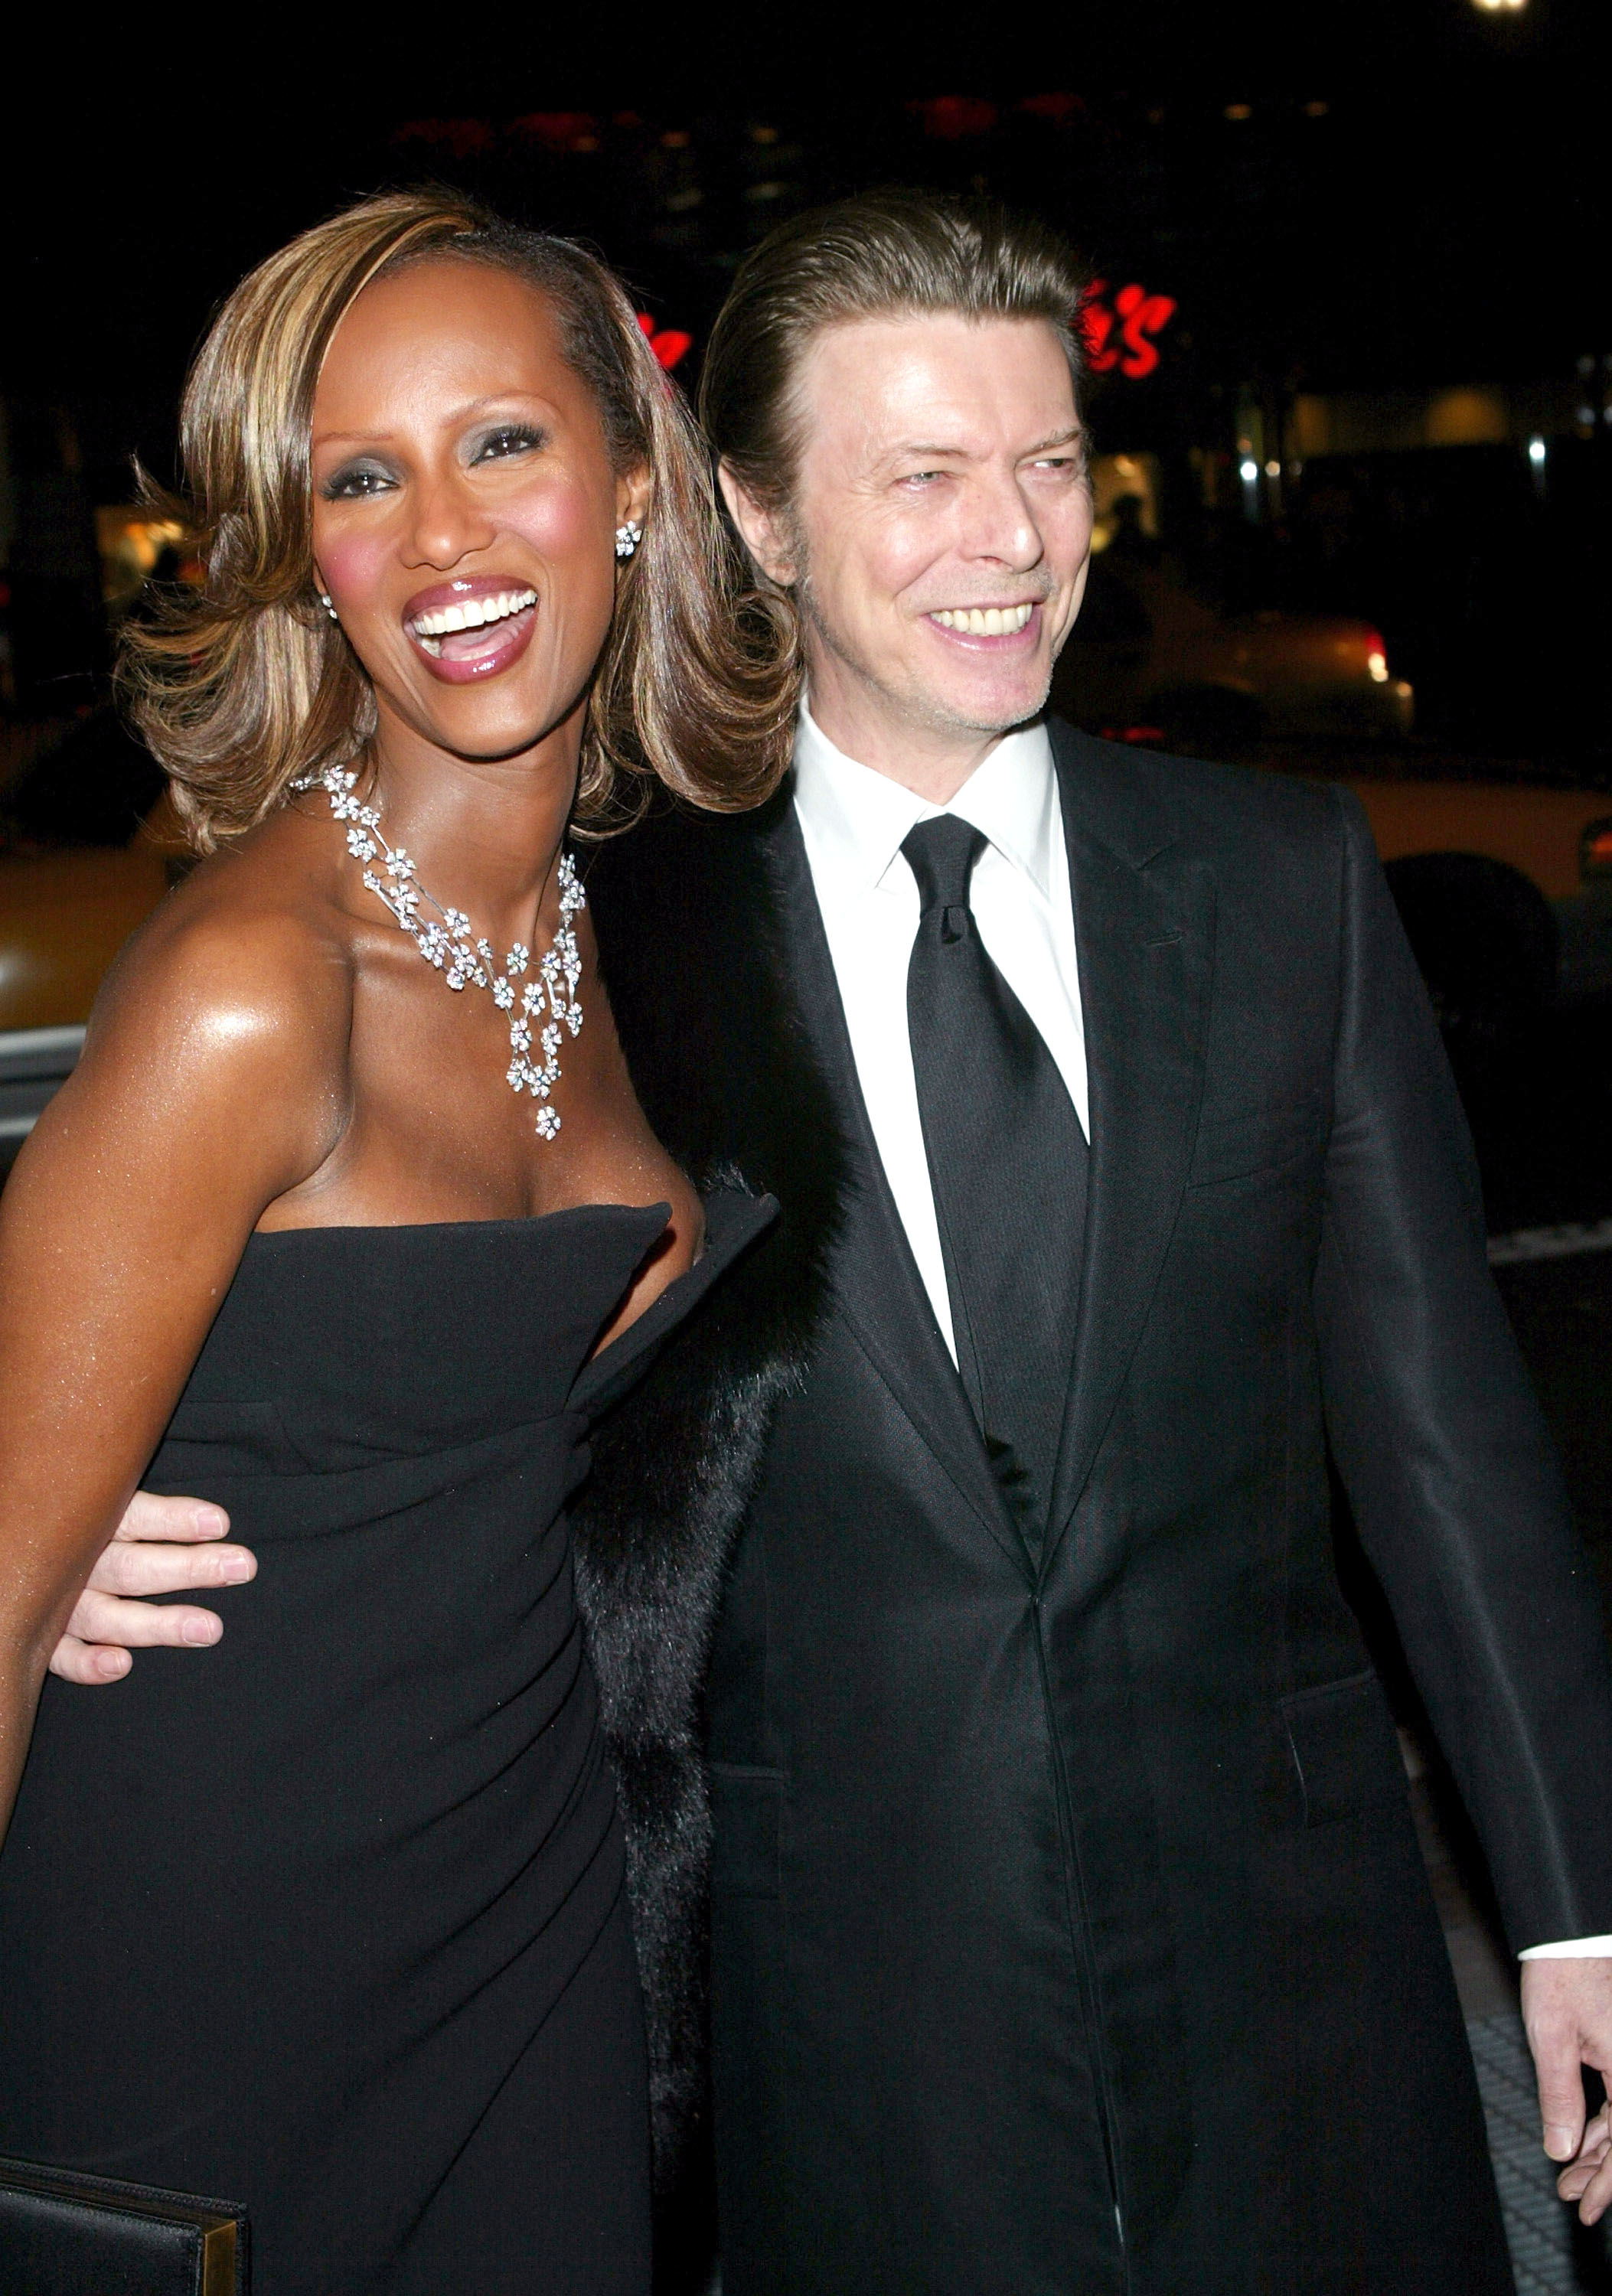 Iman Haywood and David Bowie attend the amFAR Benefit Honors Gala at Cipriani 42nd Street on February 3, 2003, in New York City | Source: Getty Images